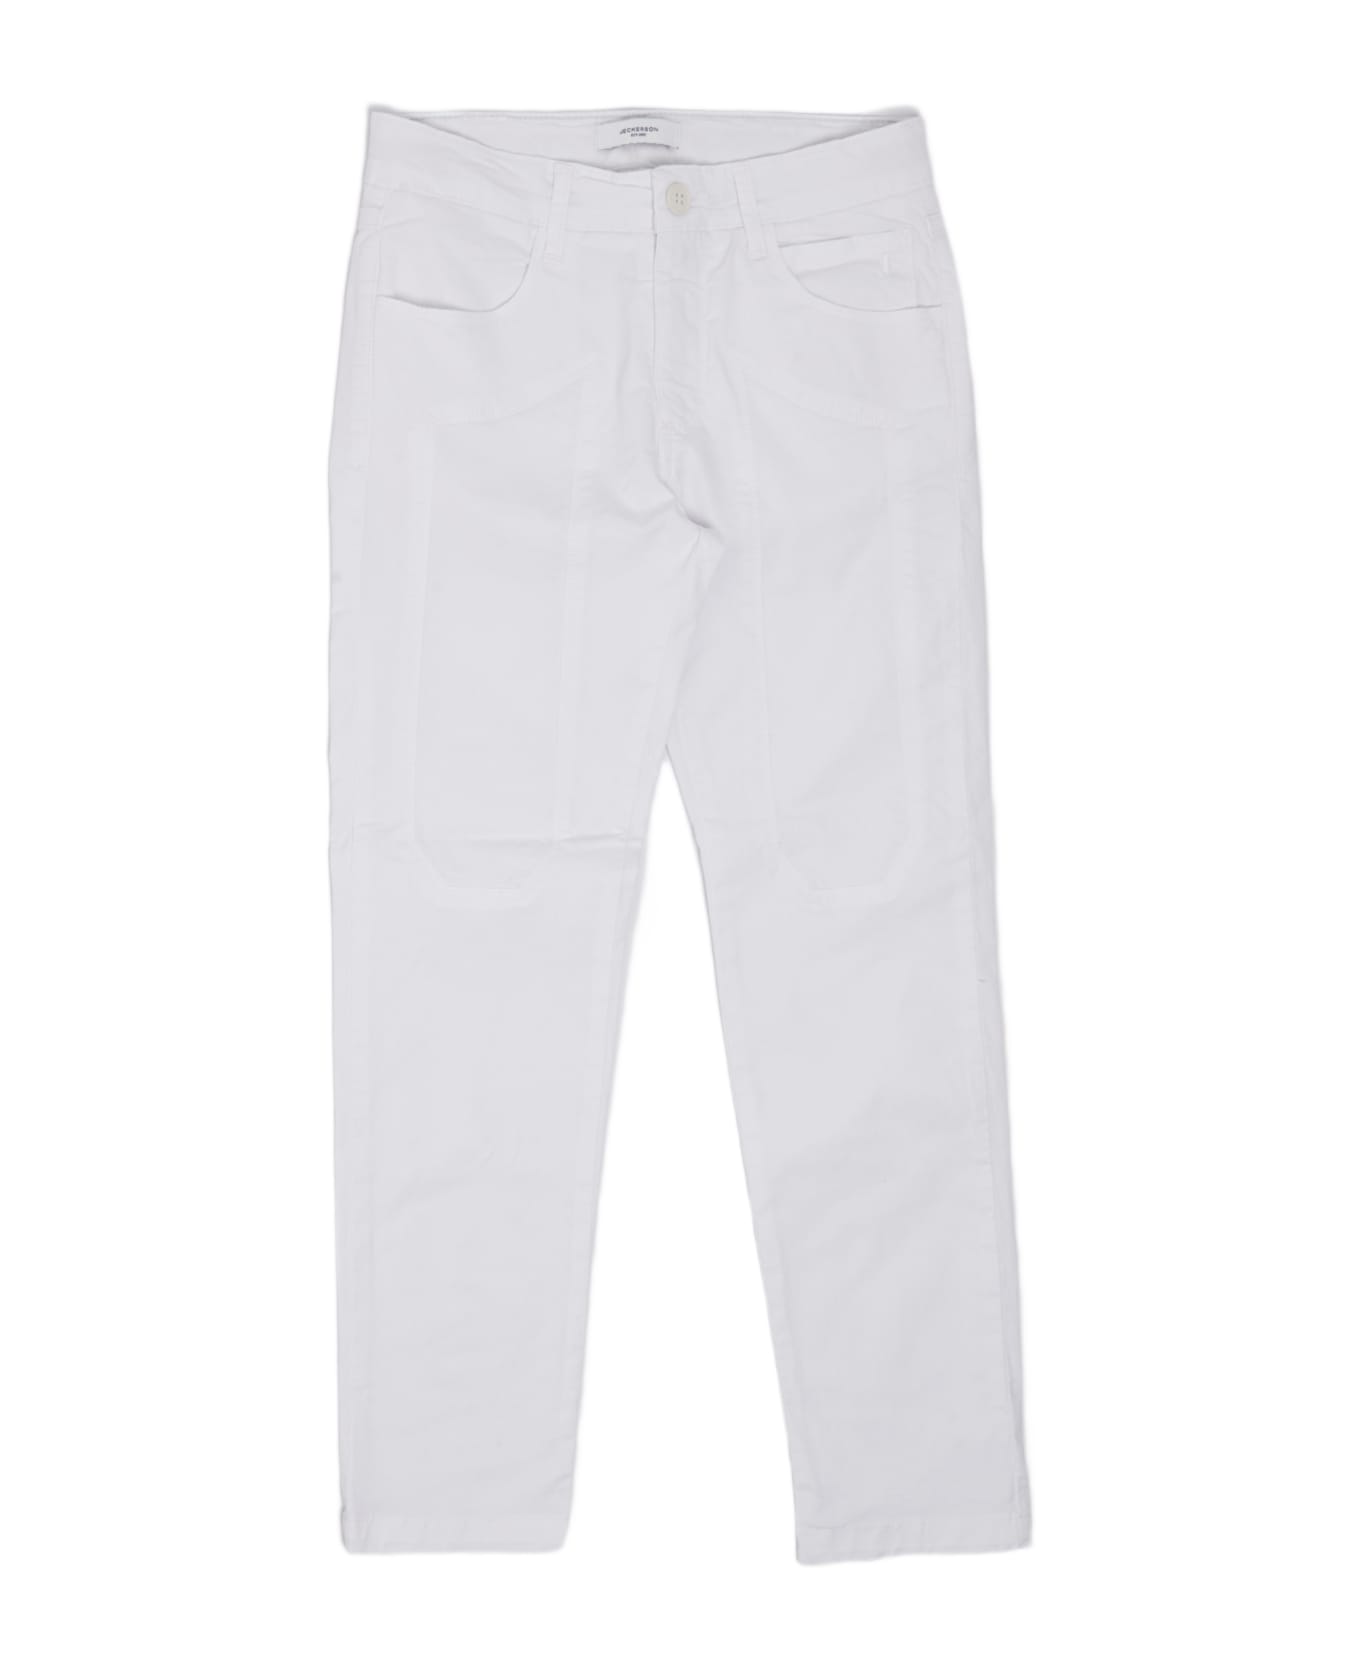 Jeckerson Trousers Trousers - BIANCO ボトムス